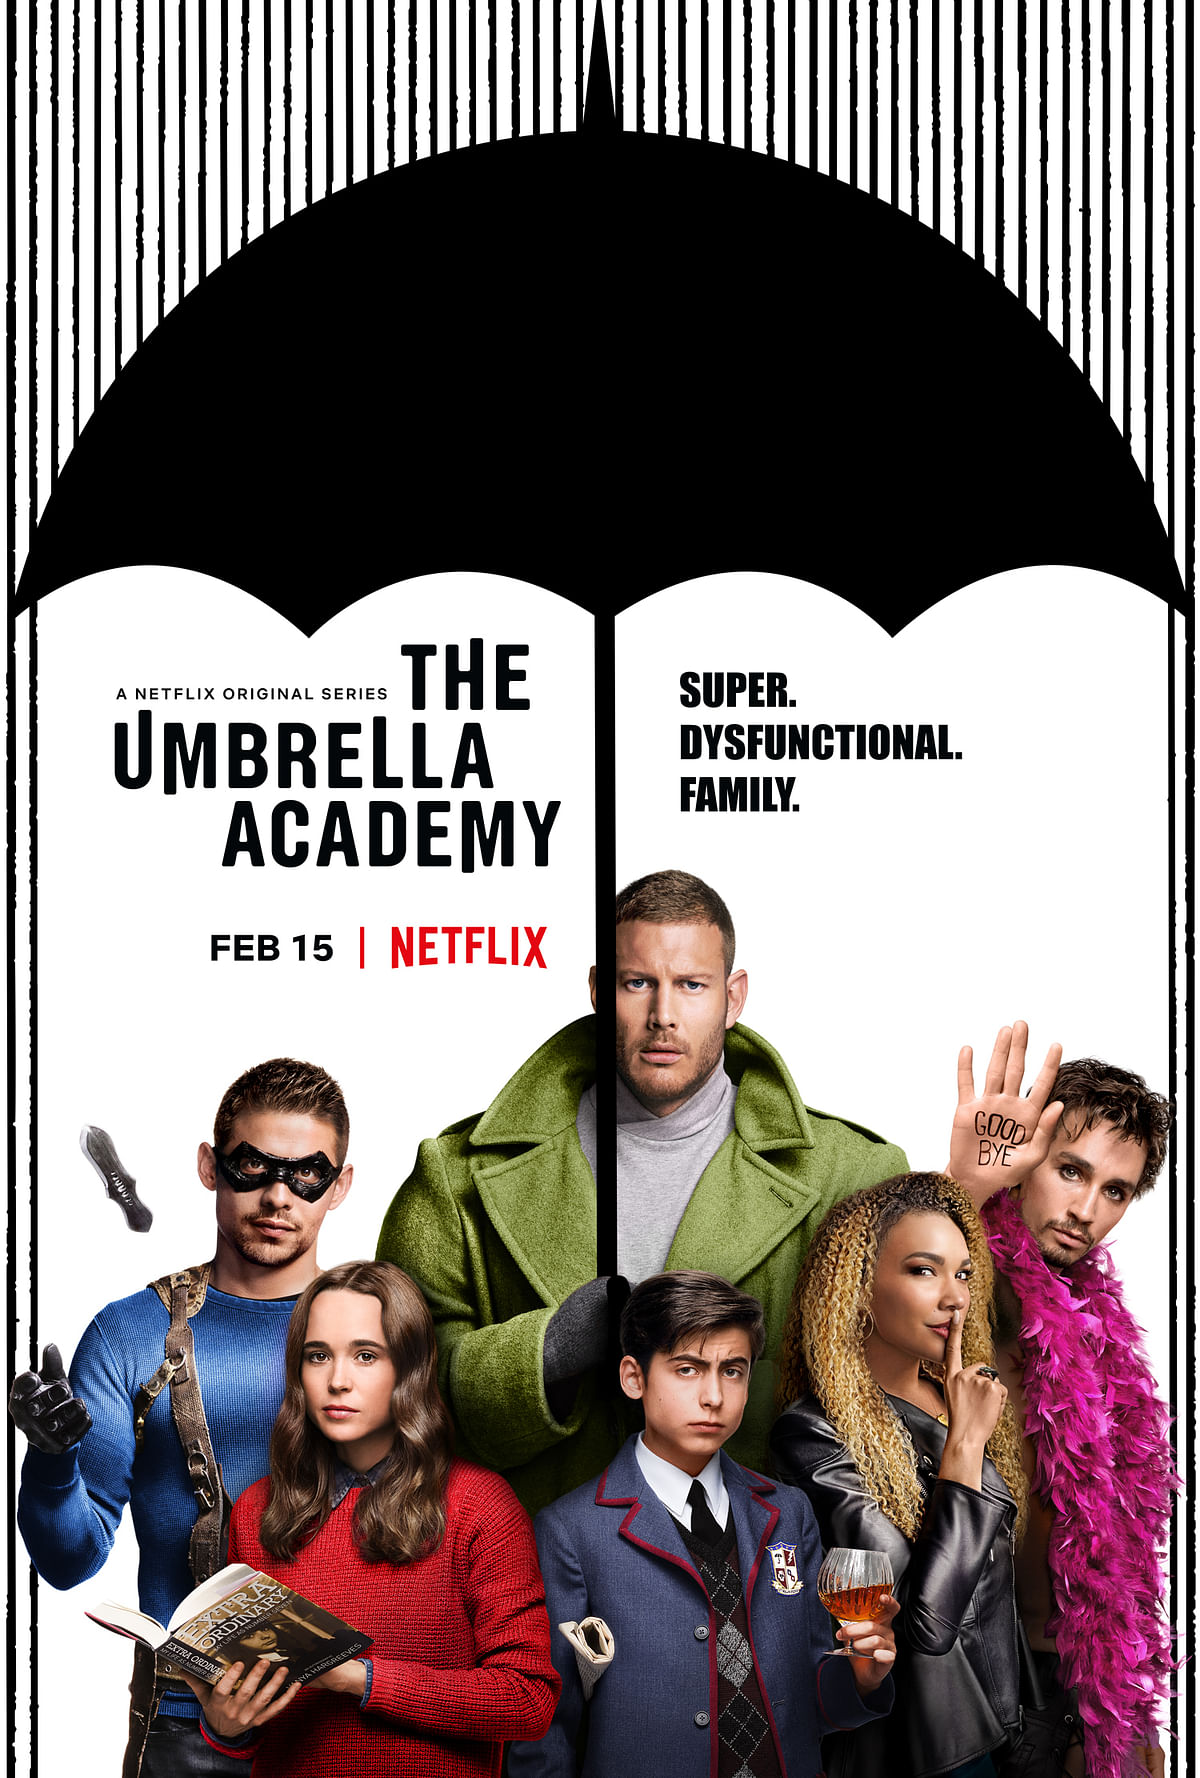 Yes, there’s enough reason to binge watch ‘The Umbrella Academy’.